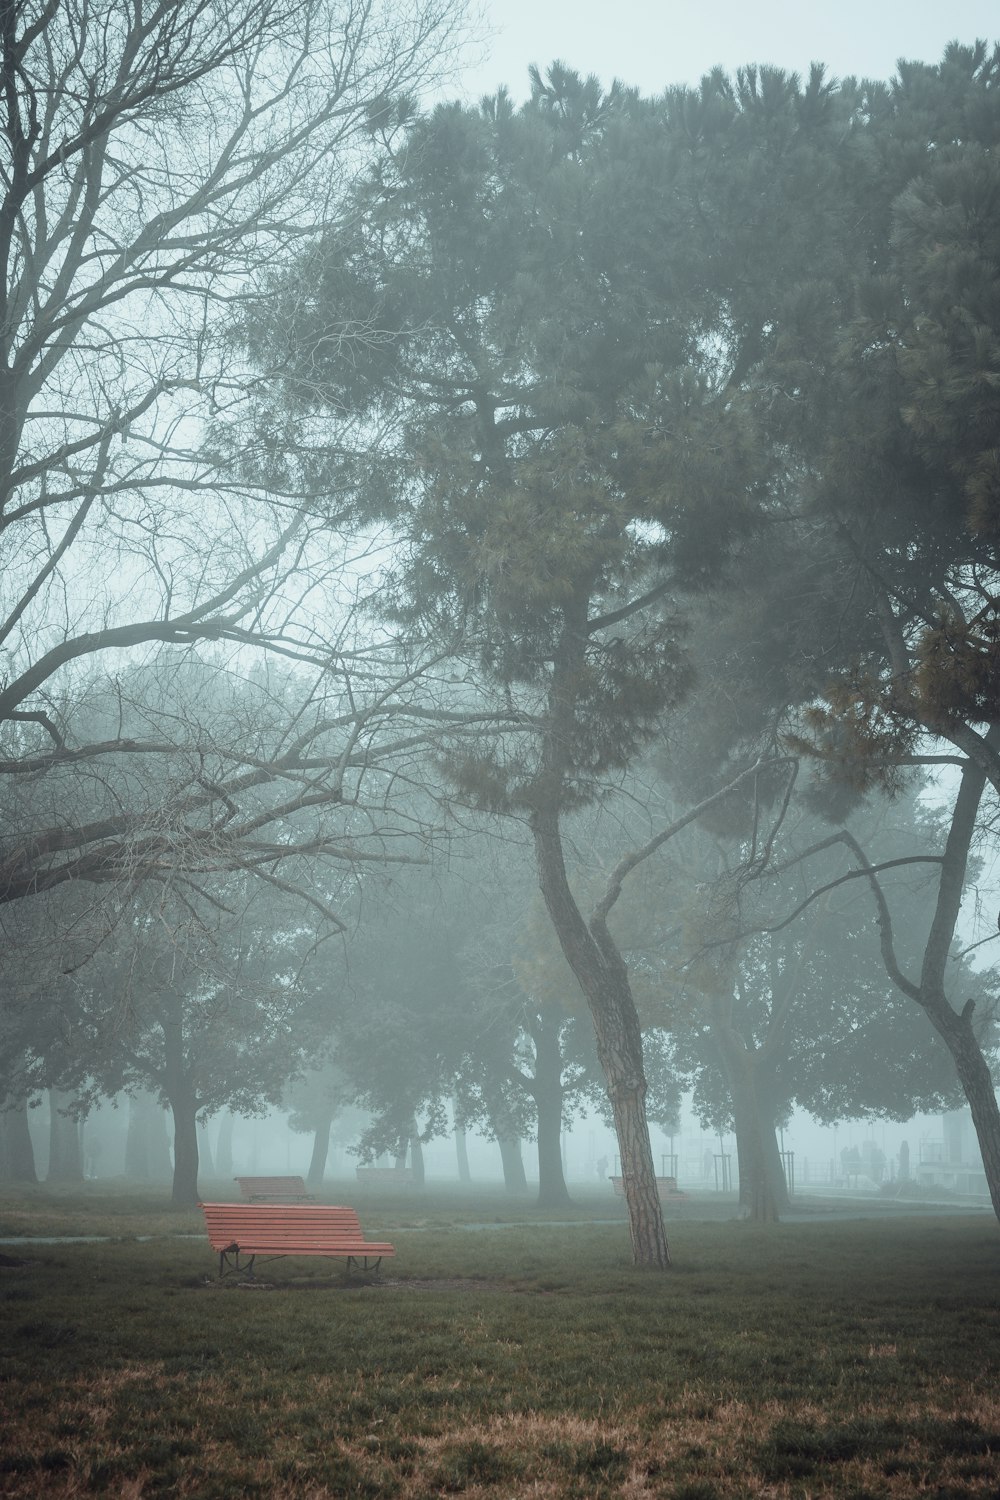 a car is parked in a foggy park